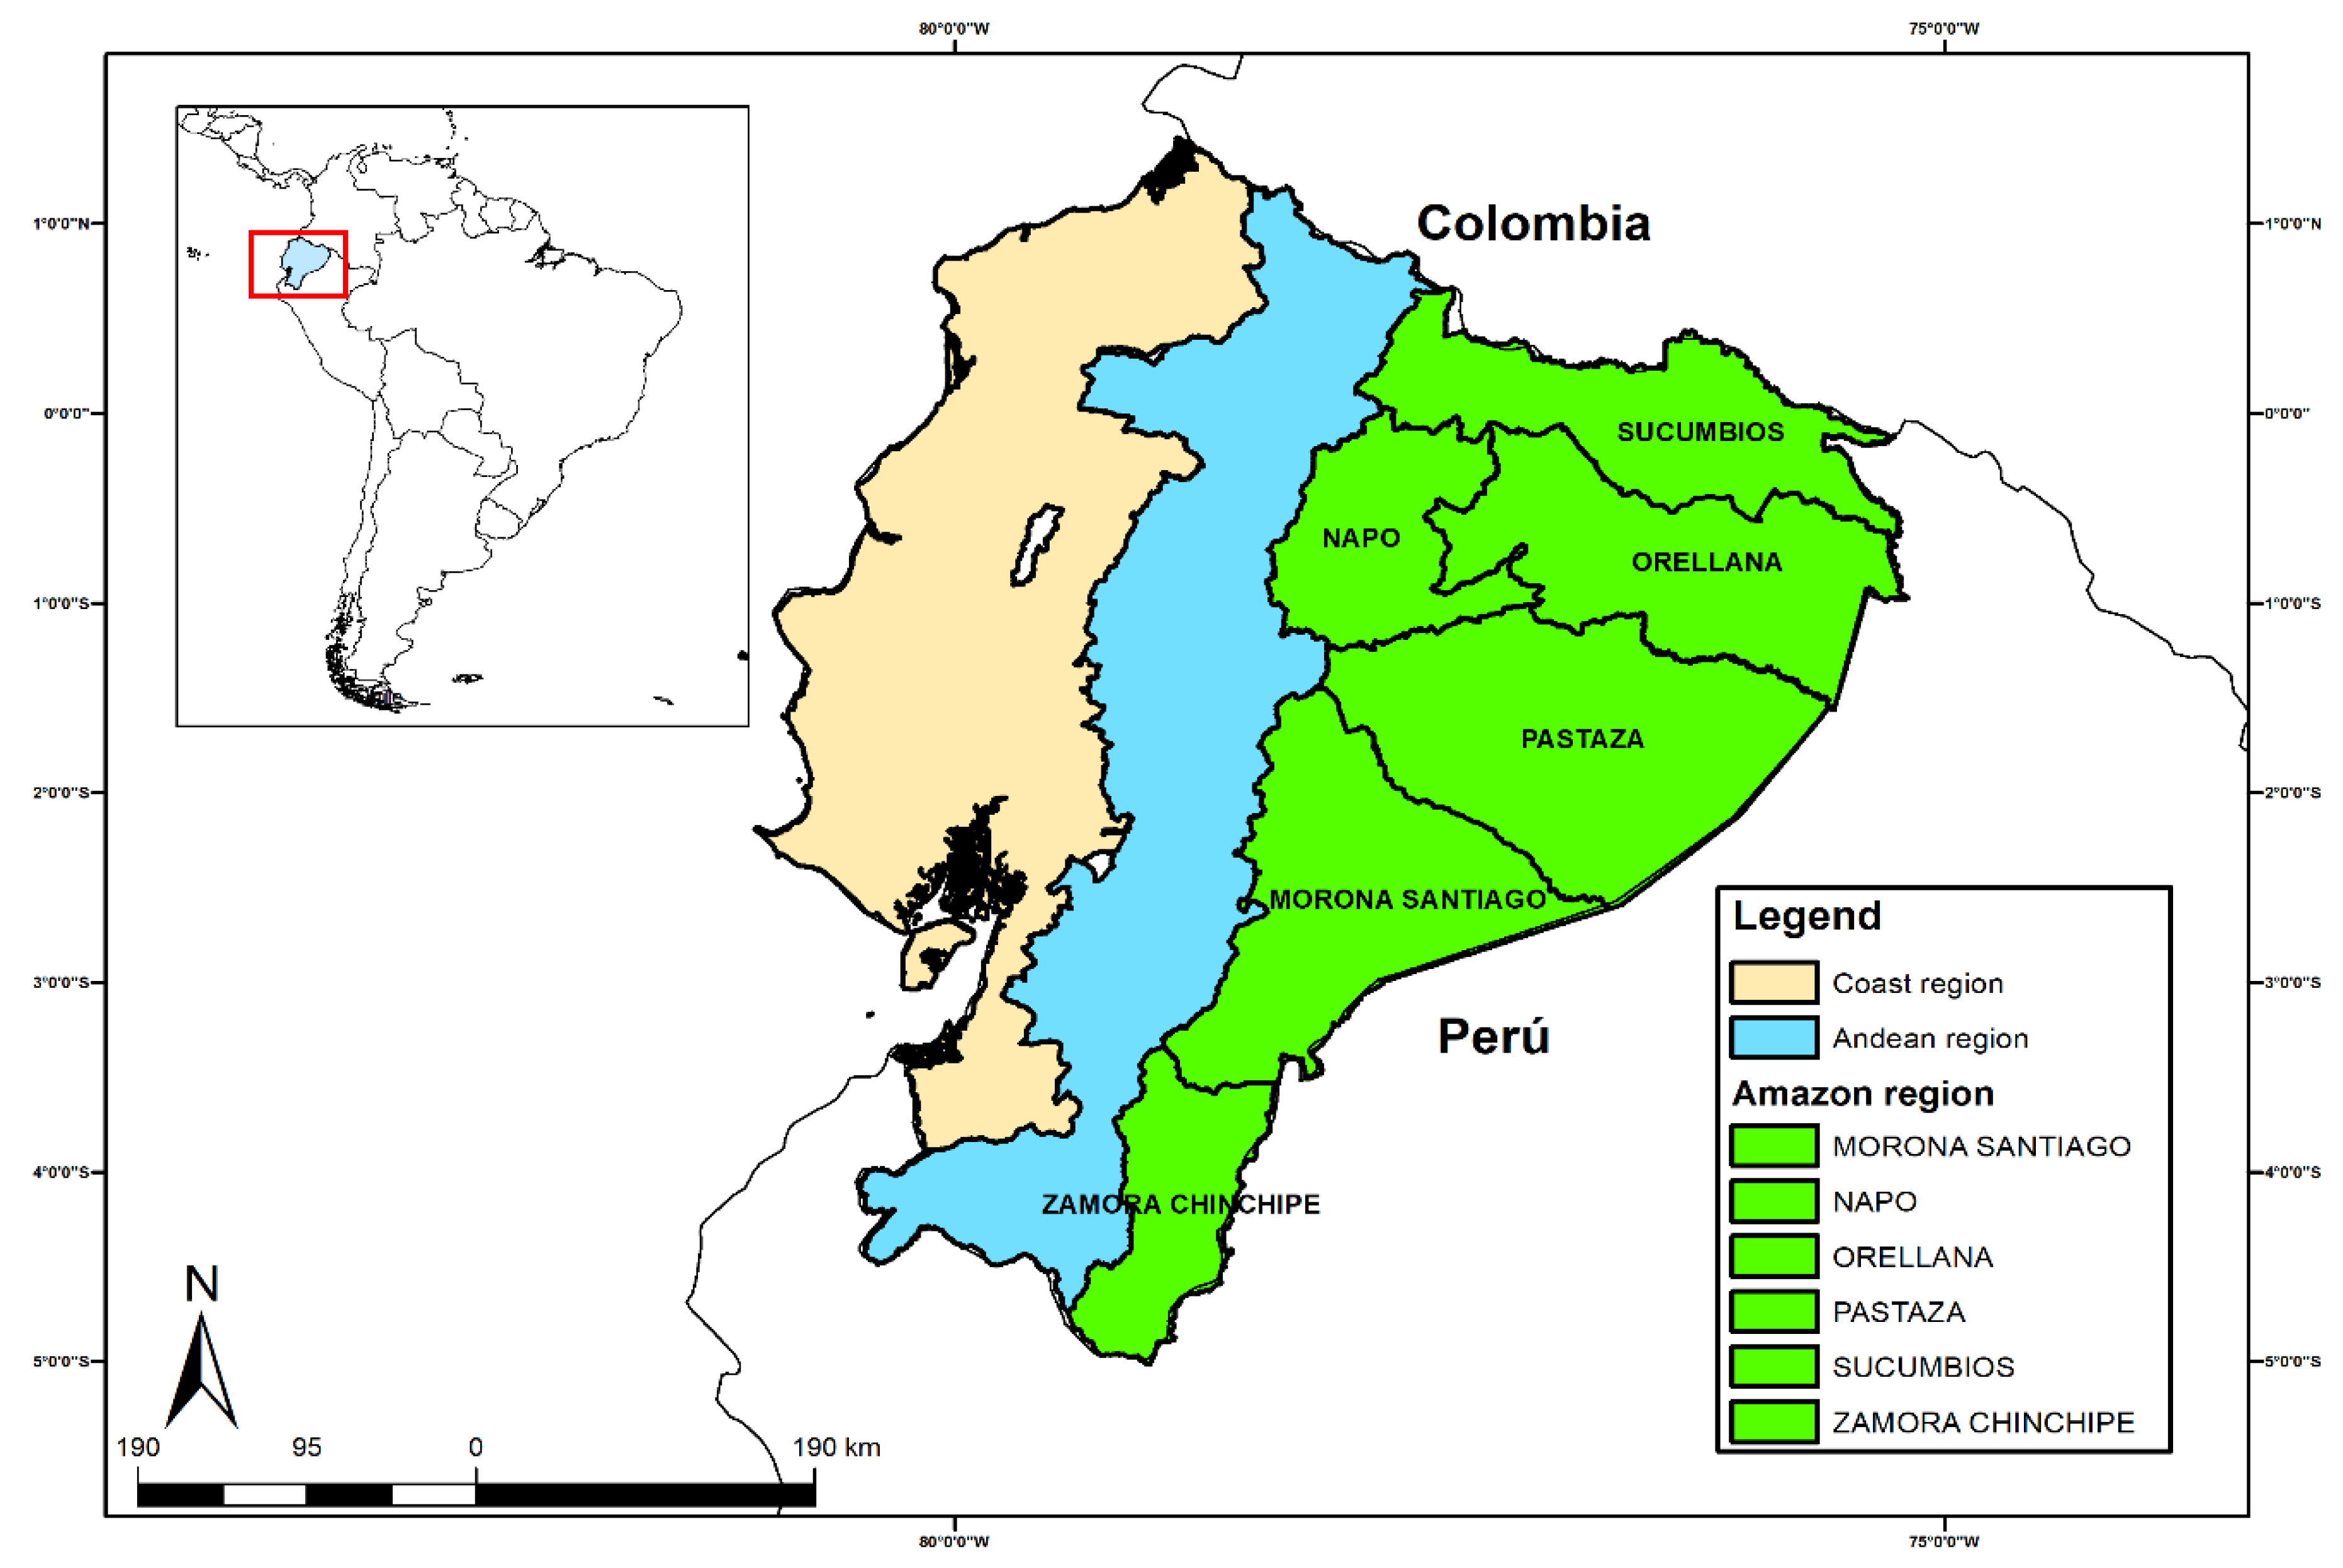 Sustainability | Free Full-Text | A Framework to Incorporate Biological  Soil Quality Indicators into Assessing the Sustainability of Territories in  the Ecuadorian Amazon | HTML